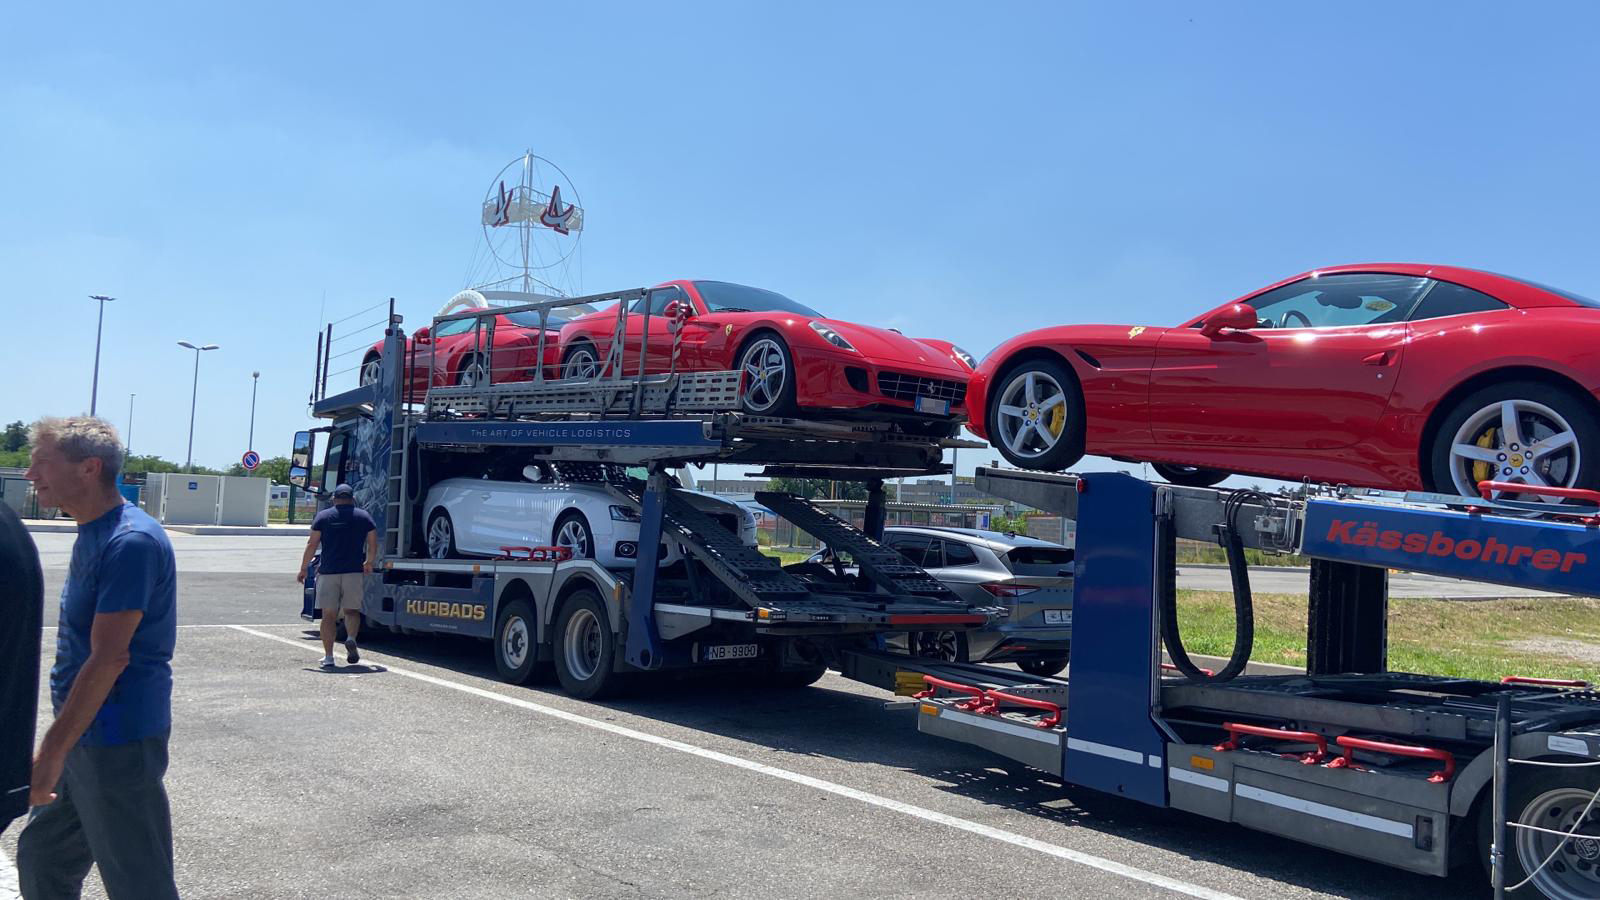 Departure of the cars from Milan.